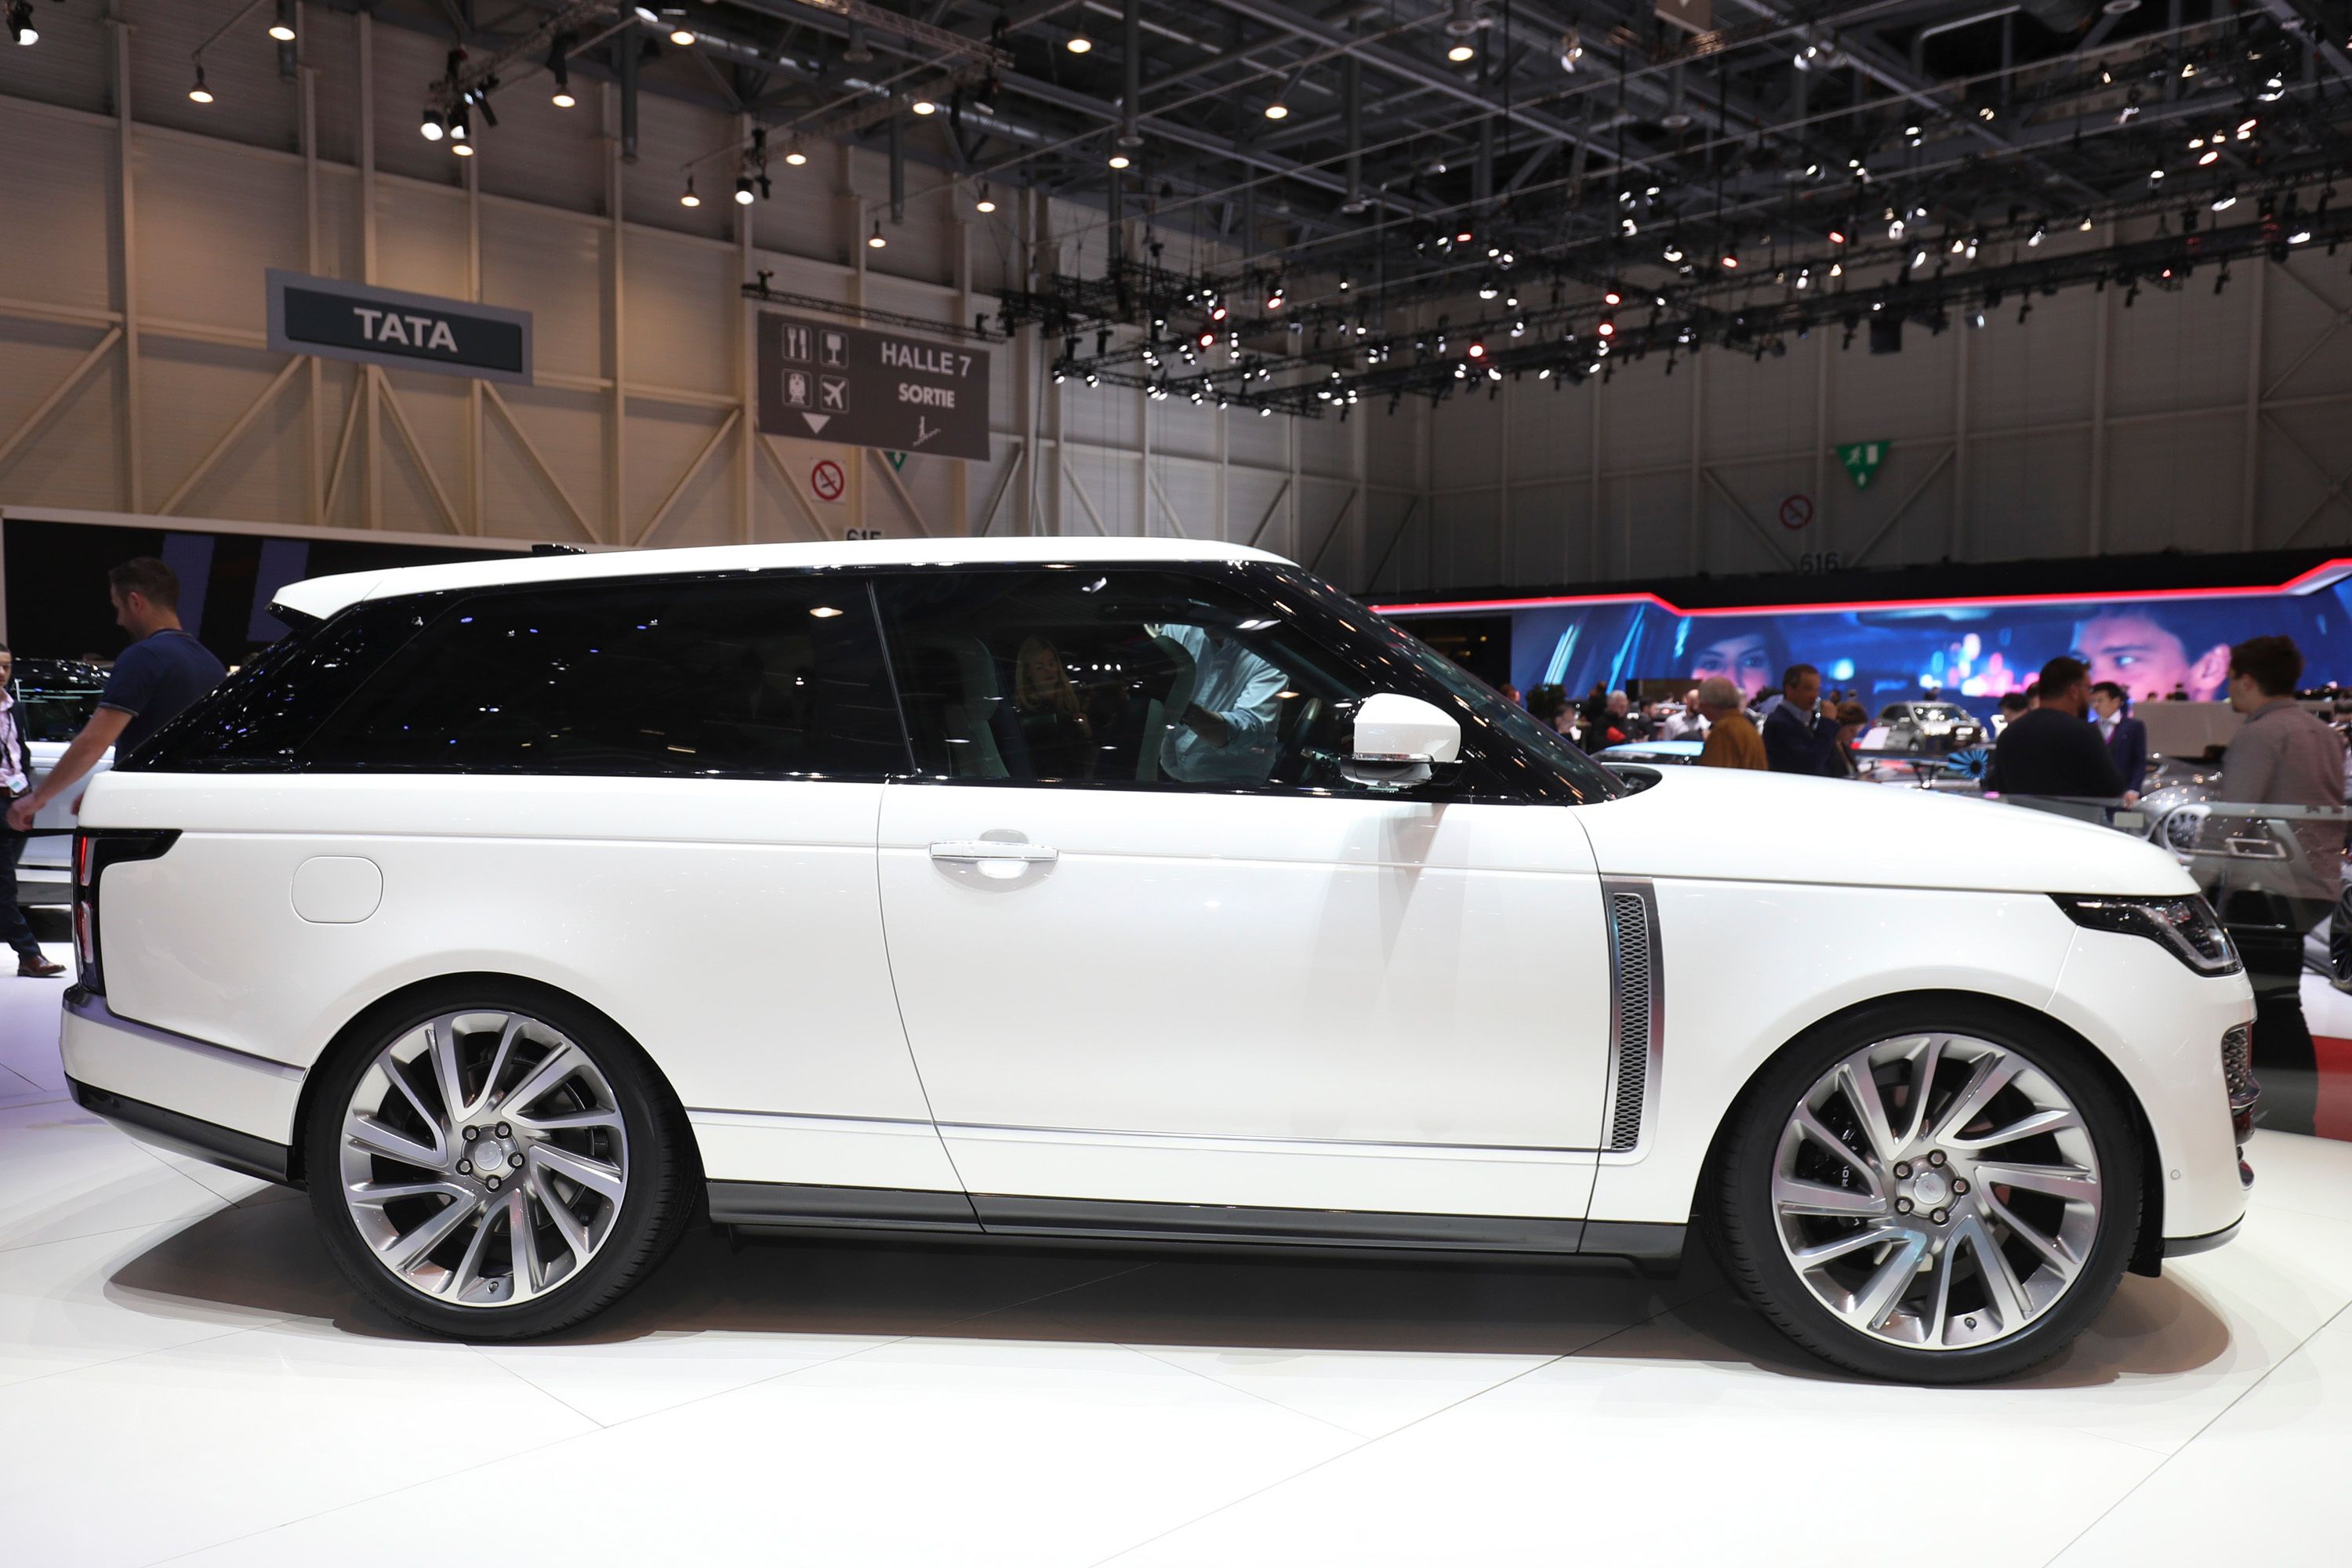 2019 Land Rover Range Rover SV Coupe